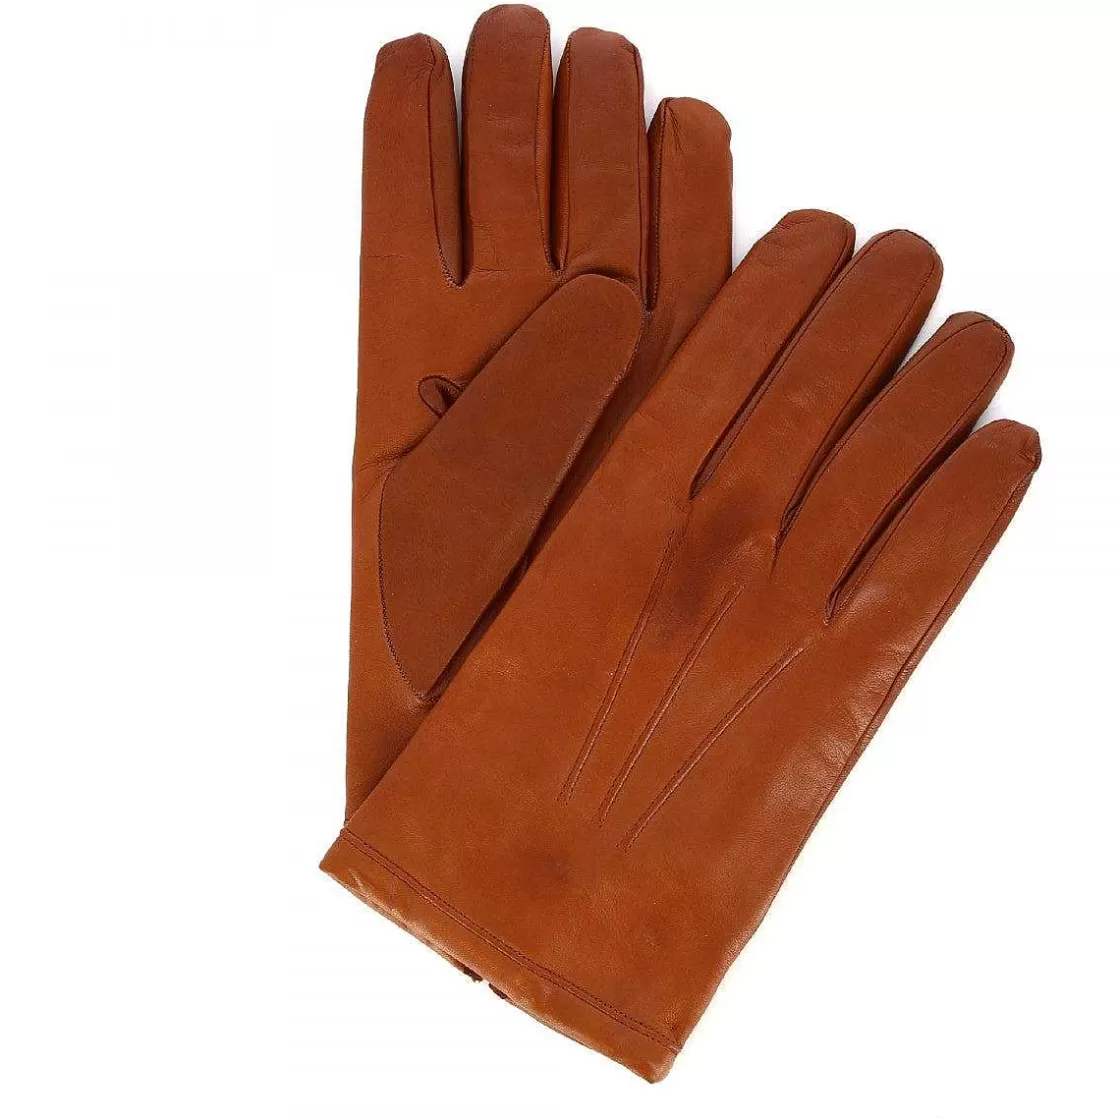 Leonardo Handmade Men'S Gloves In Brown Nappa Leather Lined In Cashmere Clearance